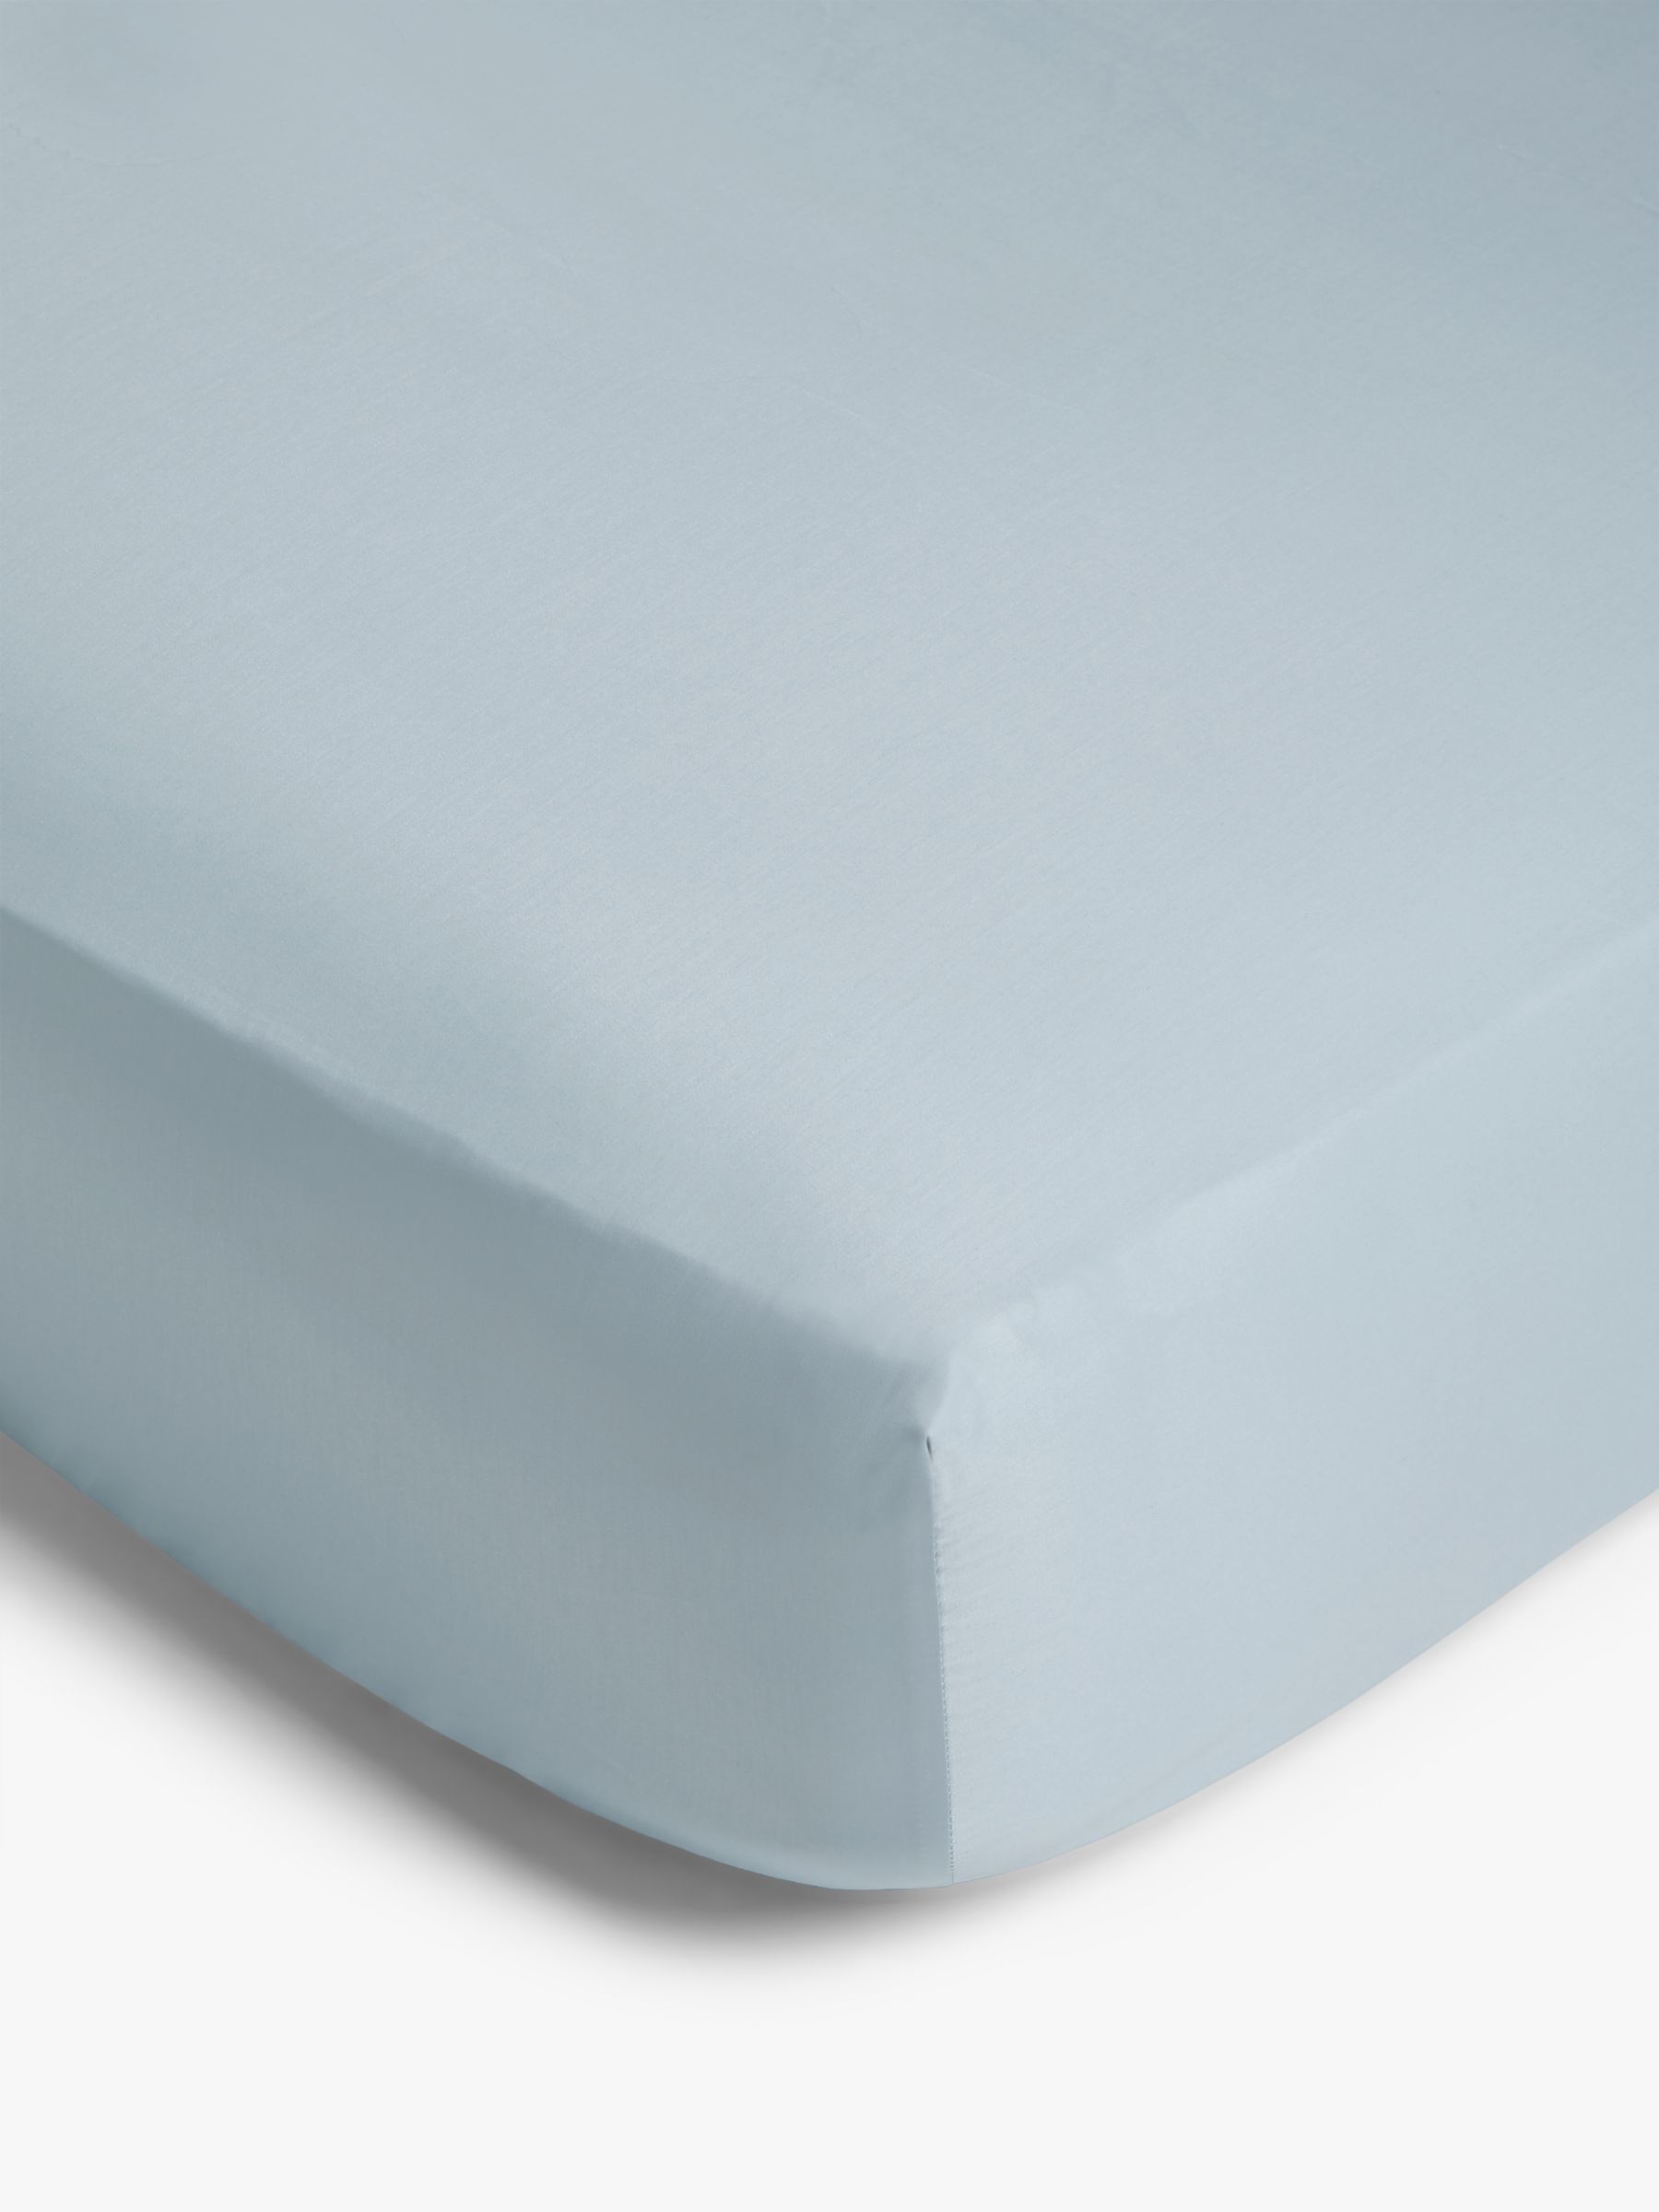 John Lewis Soft & Silky 400 Thread Count Egyptian Cotton Deep Fitted Sheet